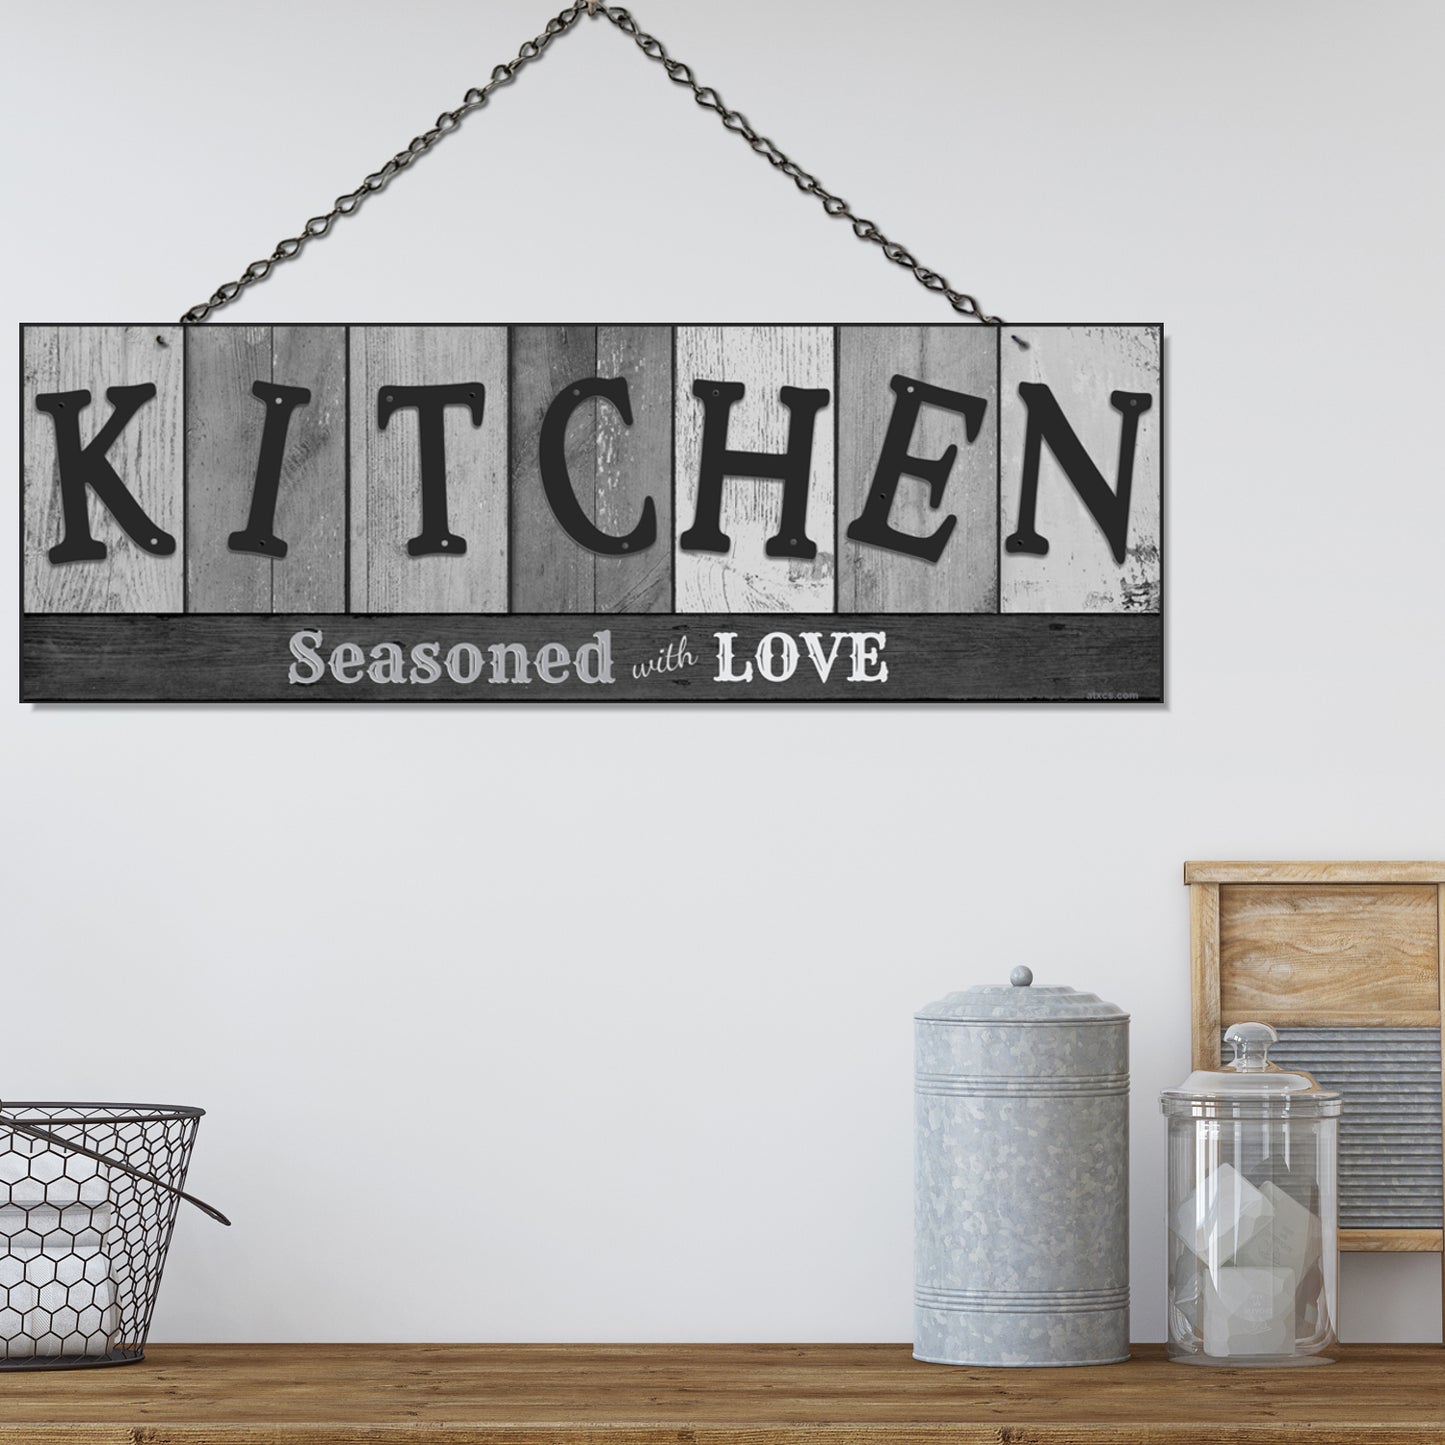 Double Sided Kitchen Sign for Home & Kitchen Decor - Kitchen Seasoned with Love. Colors and Light and Dark Grays - Size 6 x 17.25